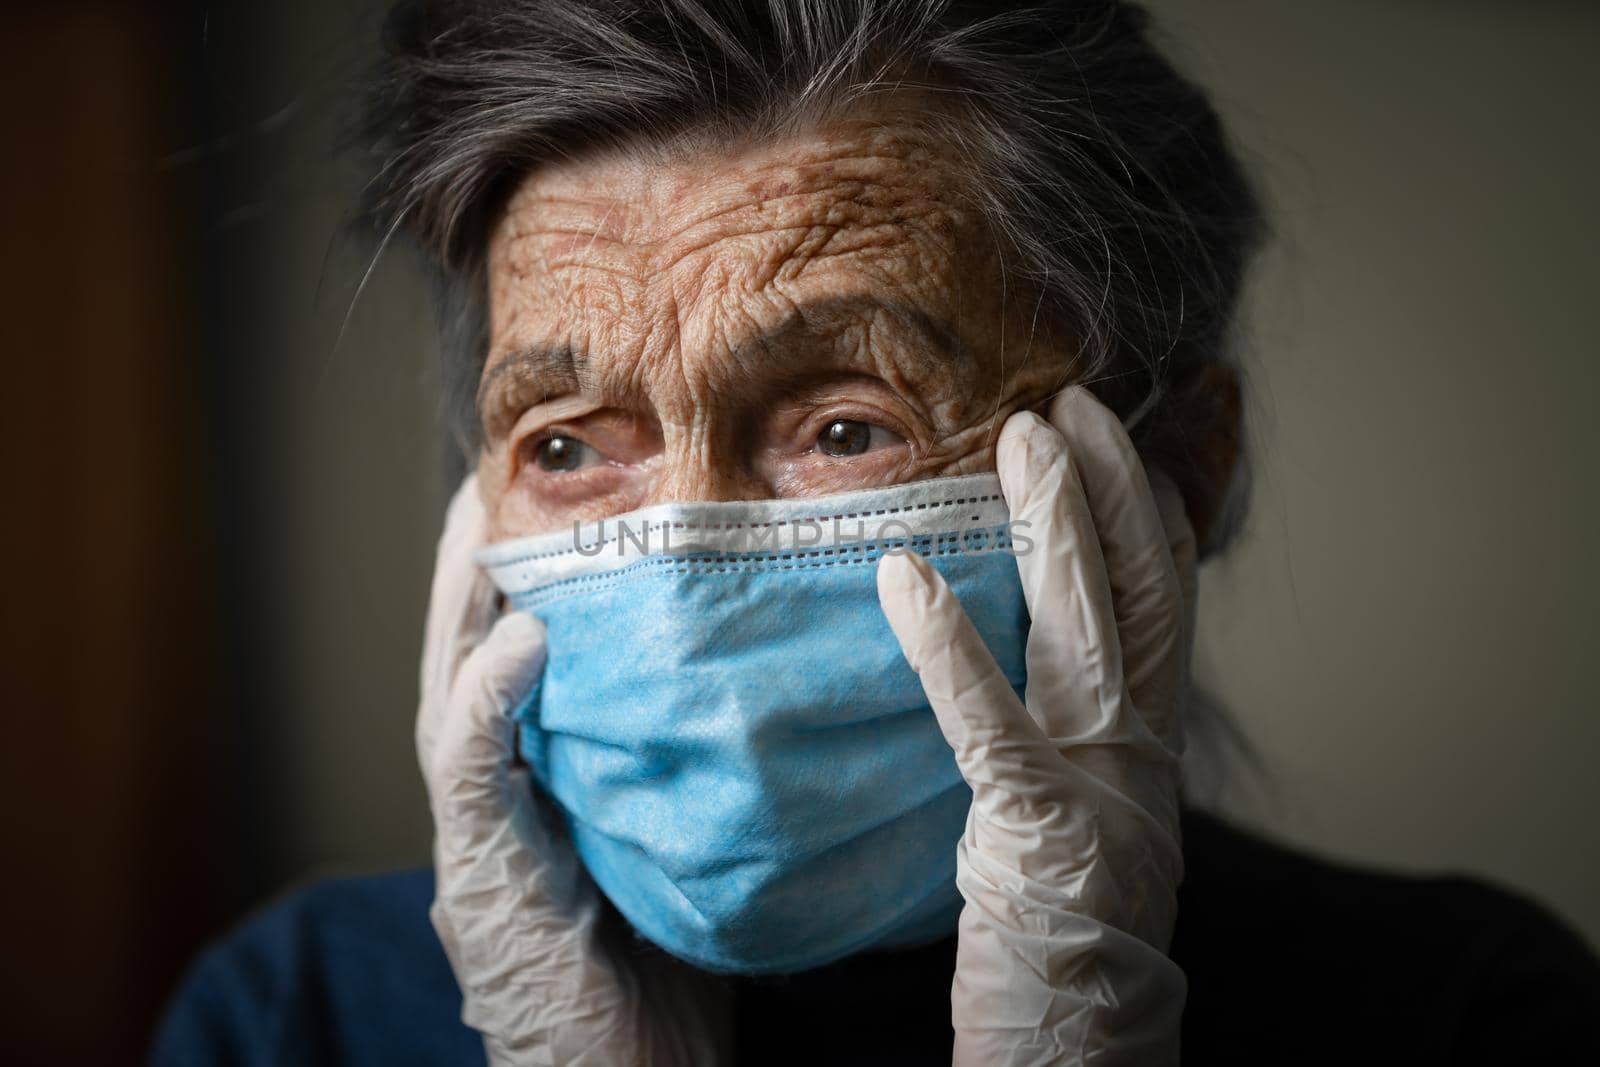 Portrait of an elderly Caucasian woman with wrinkles, wearing a medical mask and gloves, the emotion of fright and unpredictability due to the coronavirus epidemic. Elderly health and medicine theme.